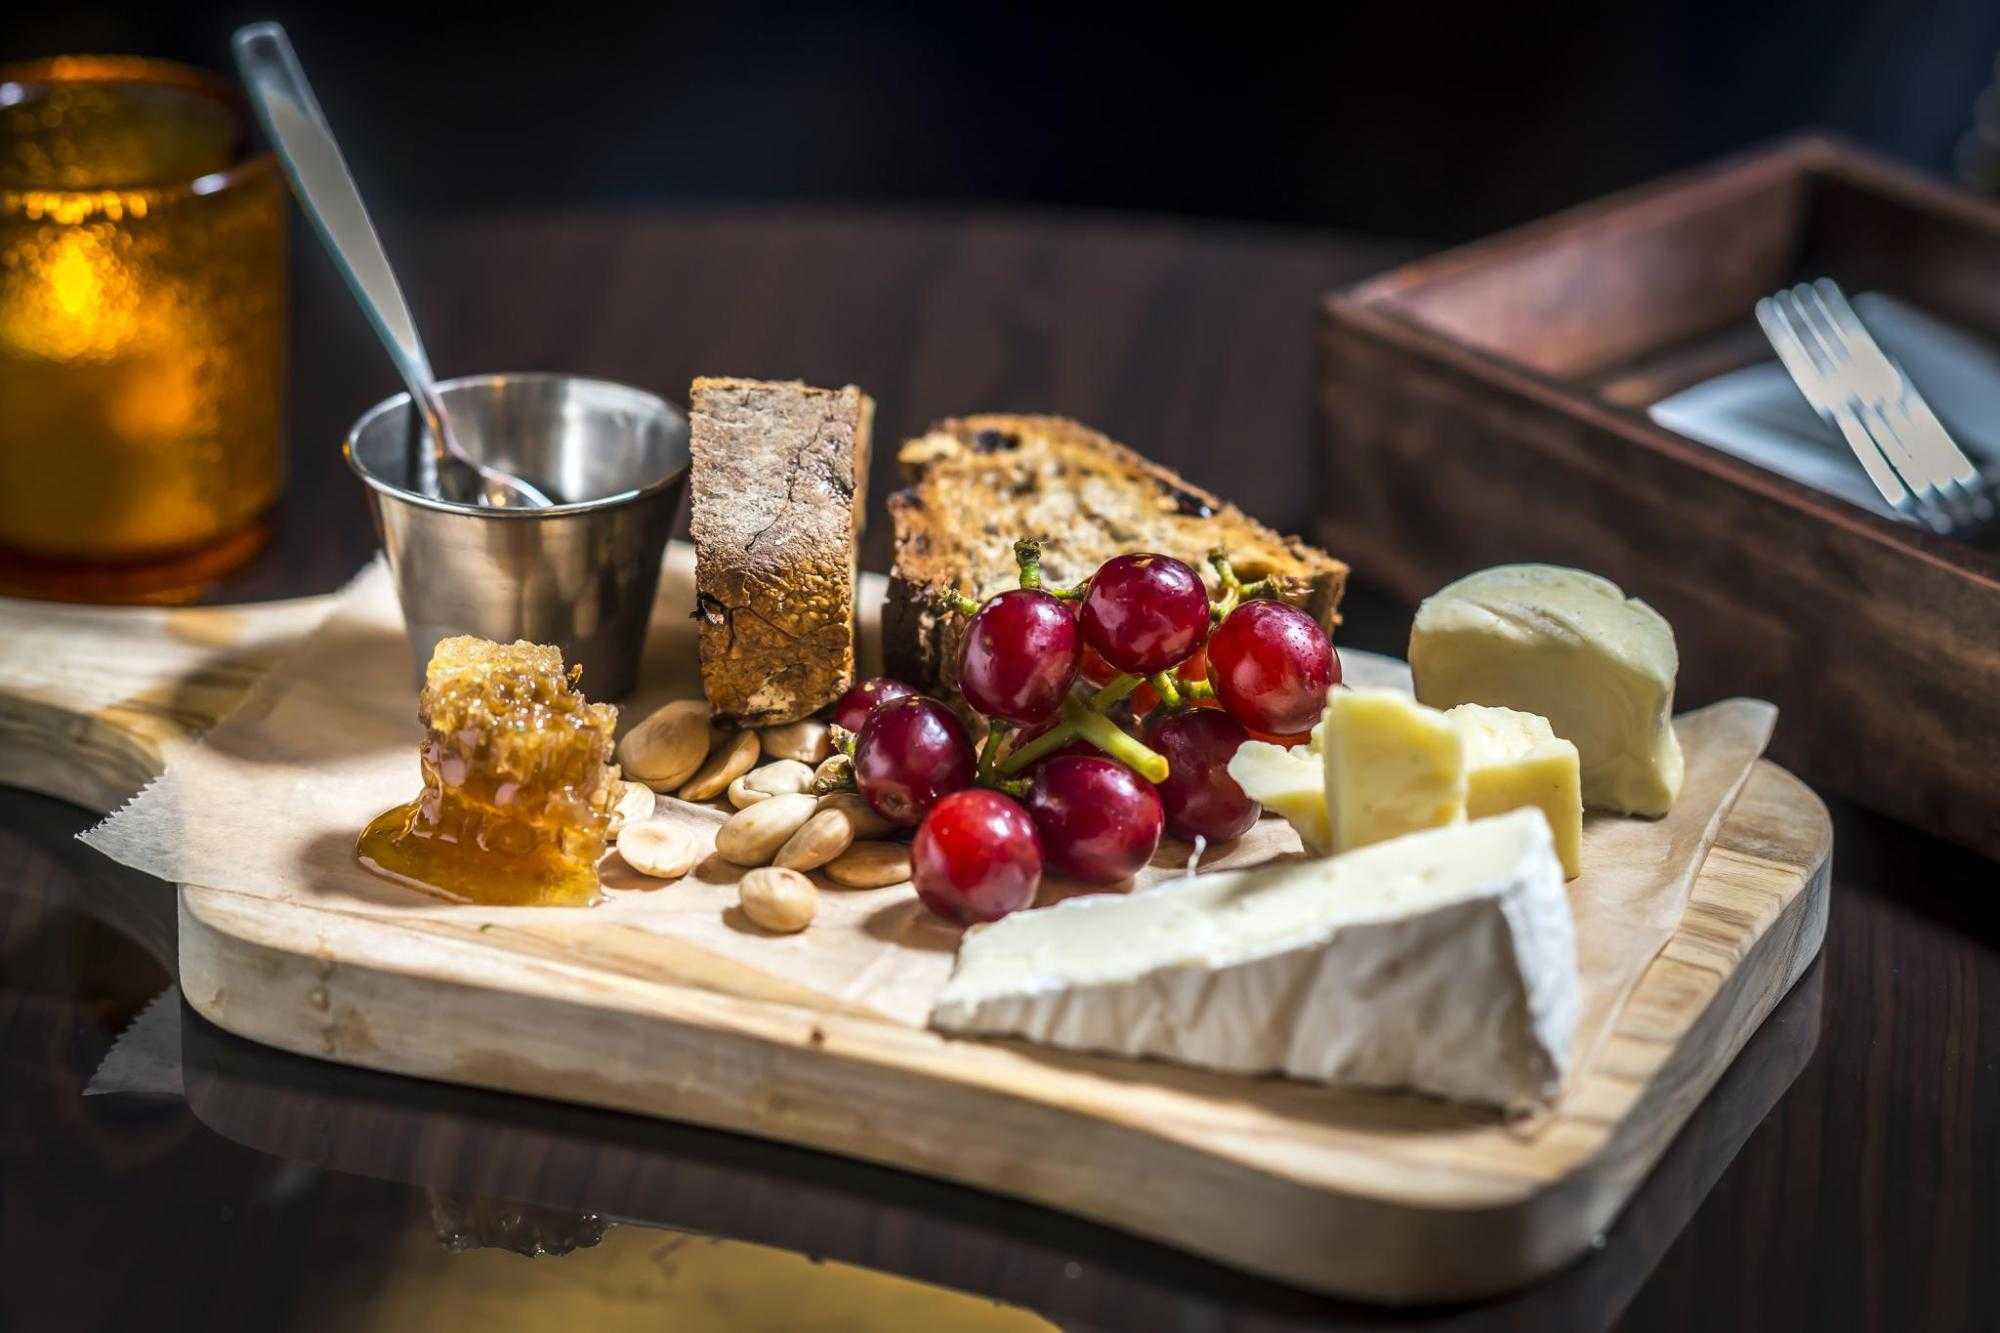 Plate of cheese, bread and grapes